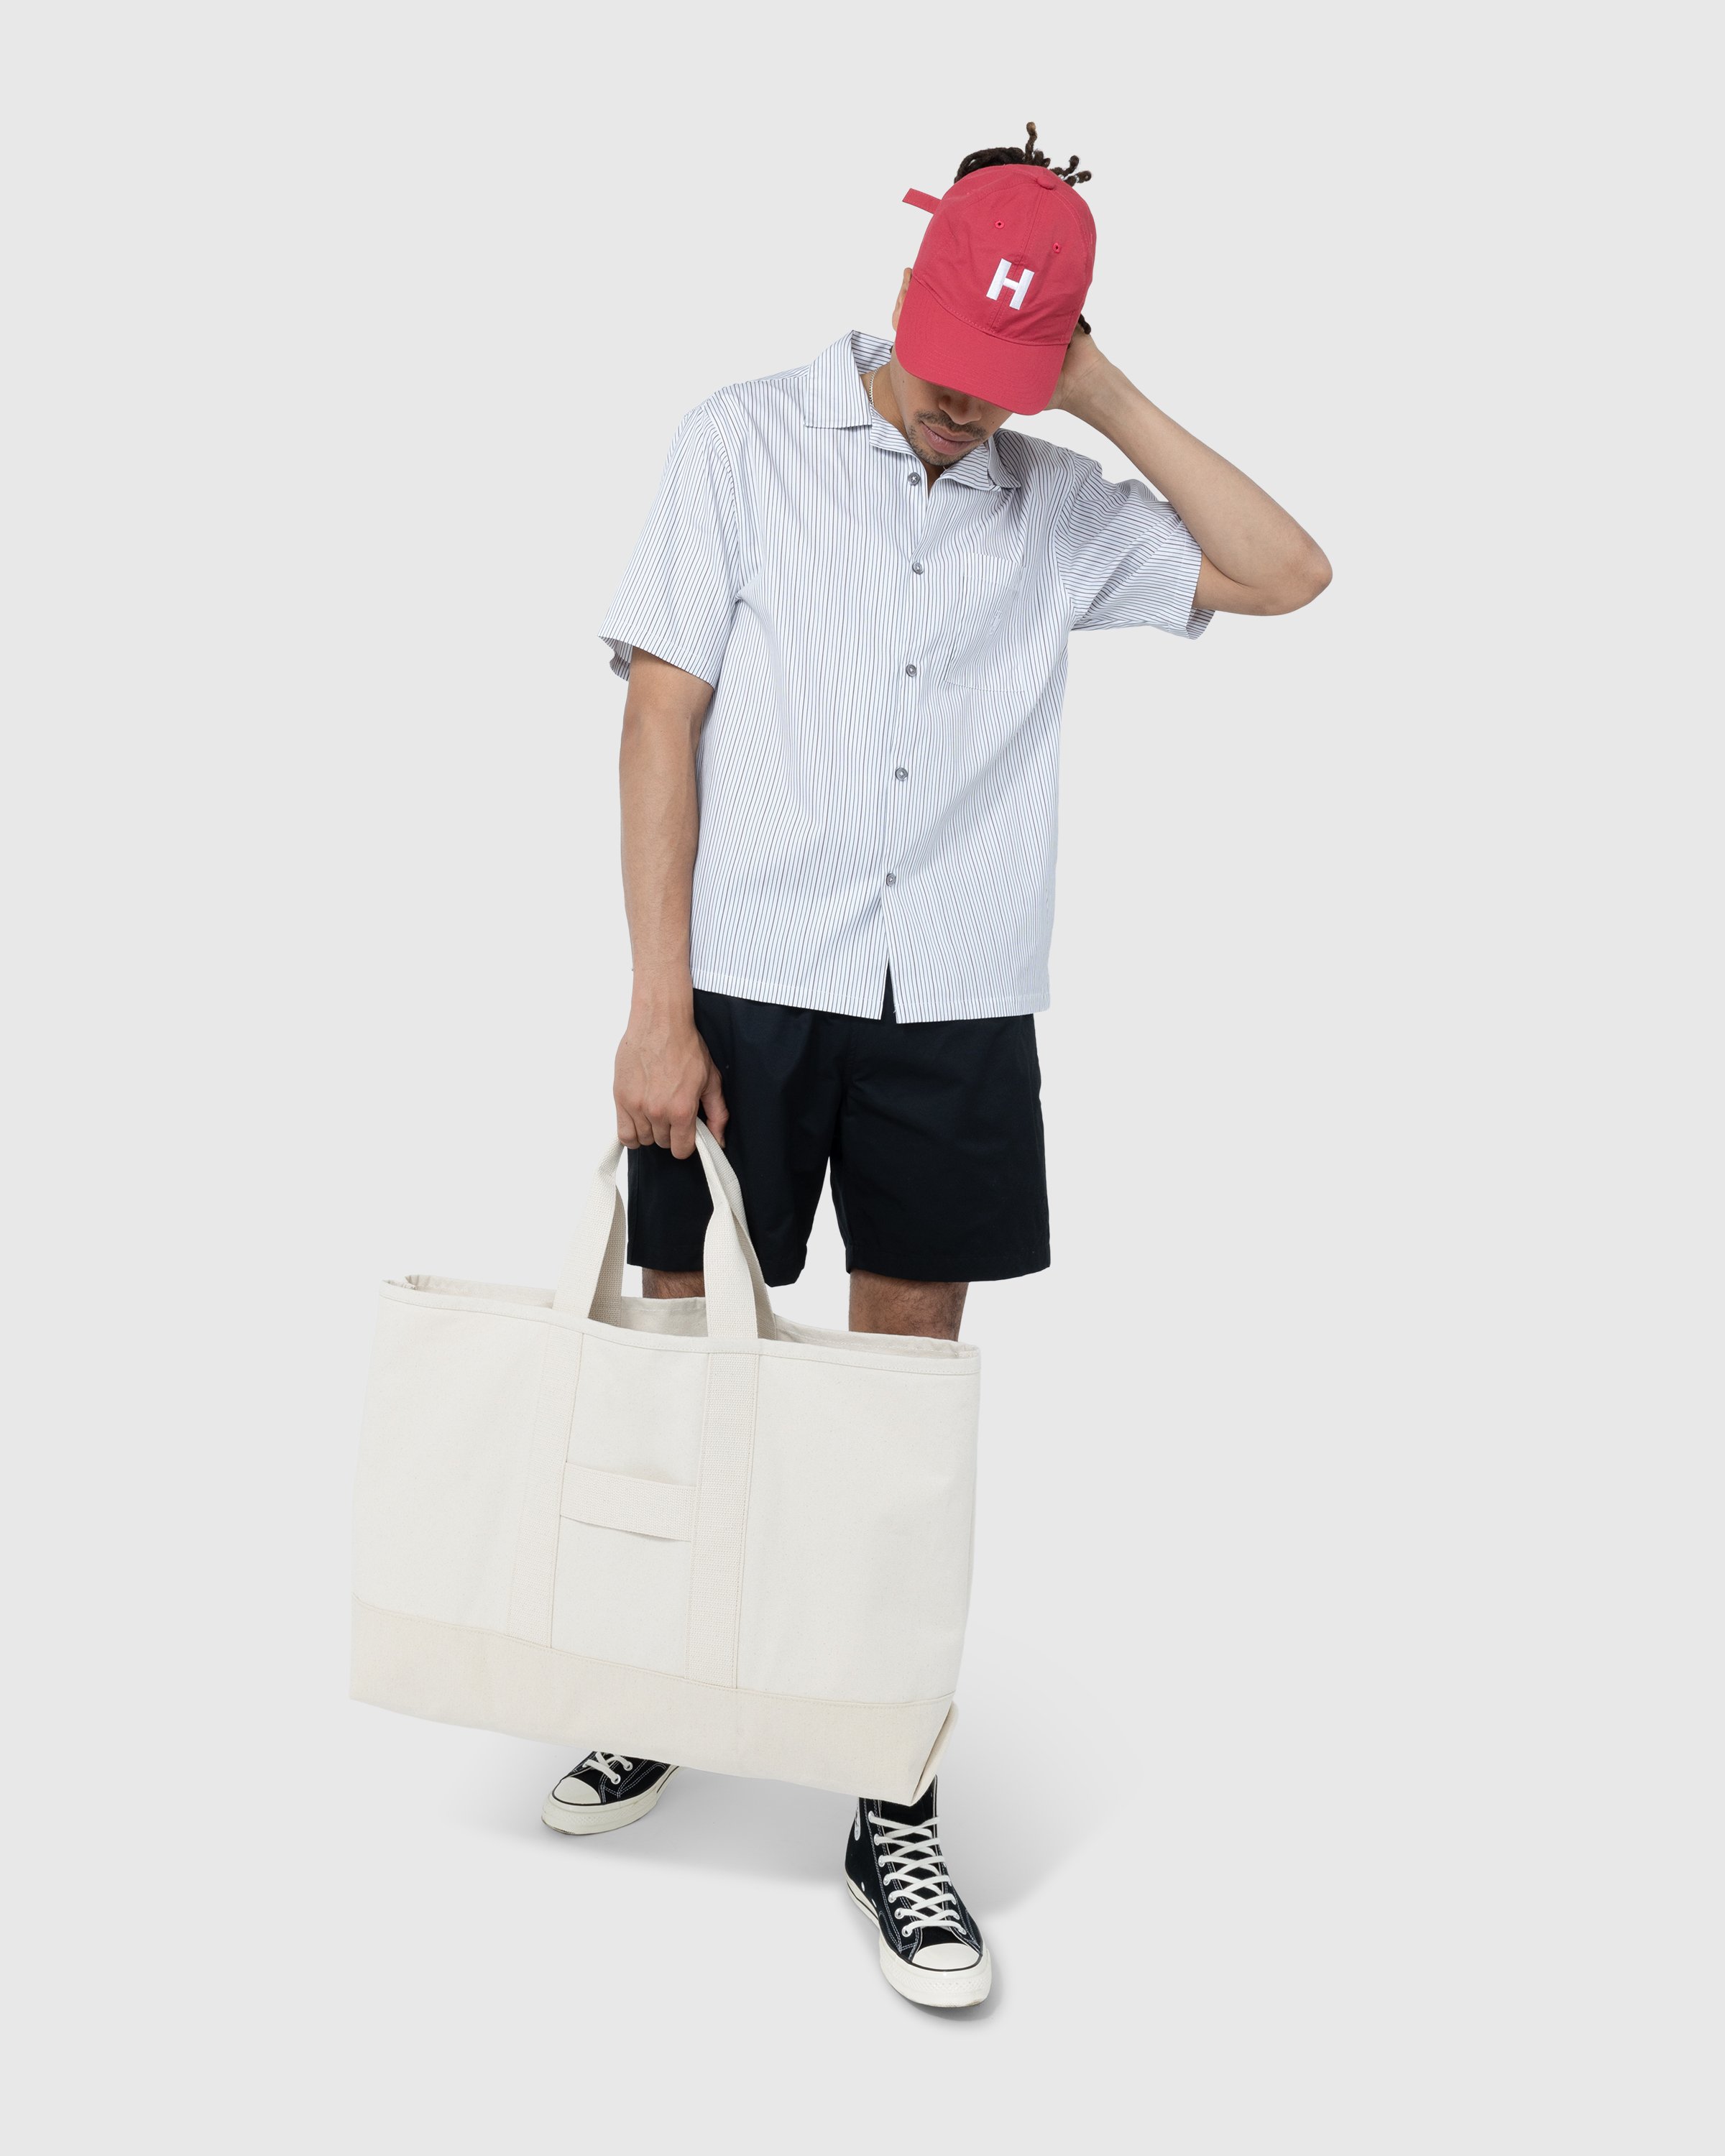 Highsnobiety - XL Canvas "H" Tote Natural - Accessories - Beige - Image 6